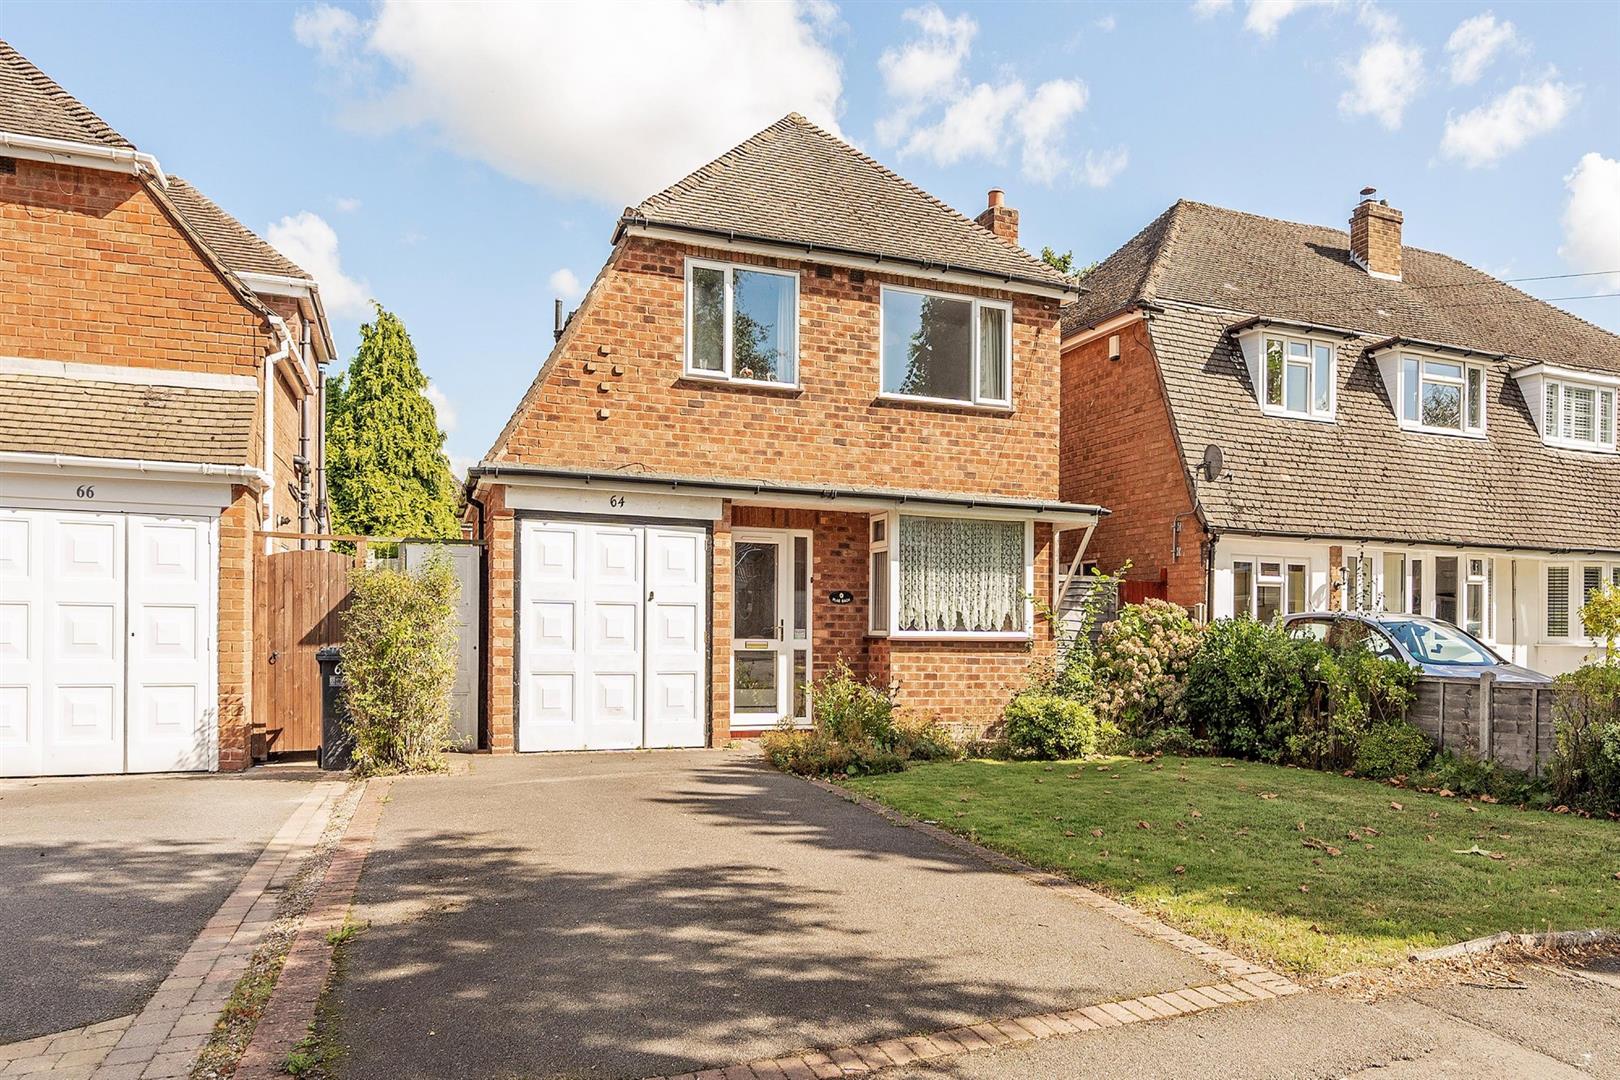 3 bed  for sale in Willow Road, Solihull, B91 